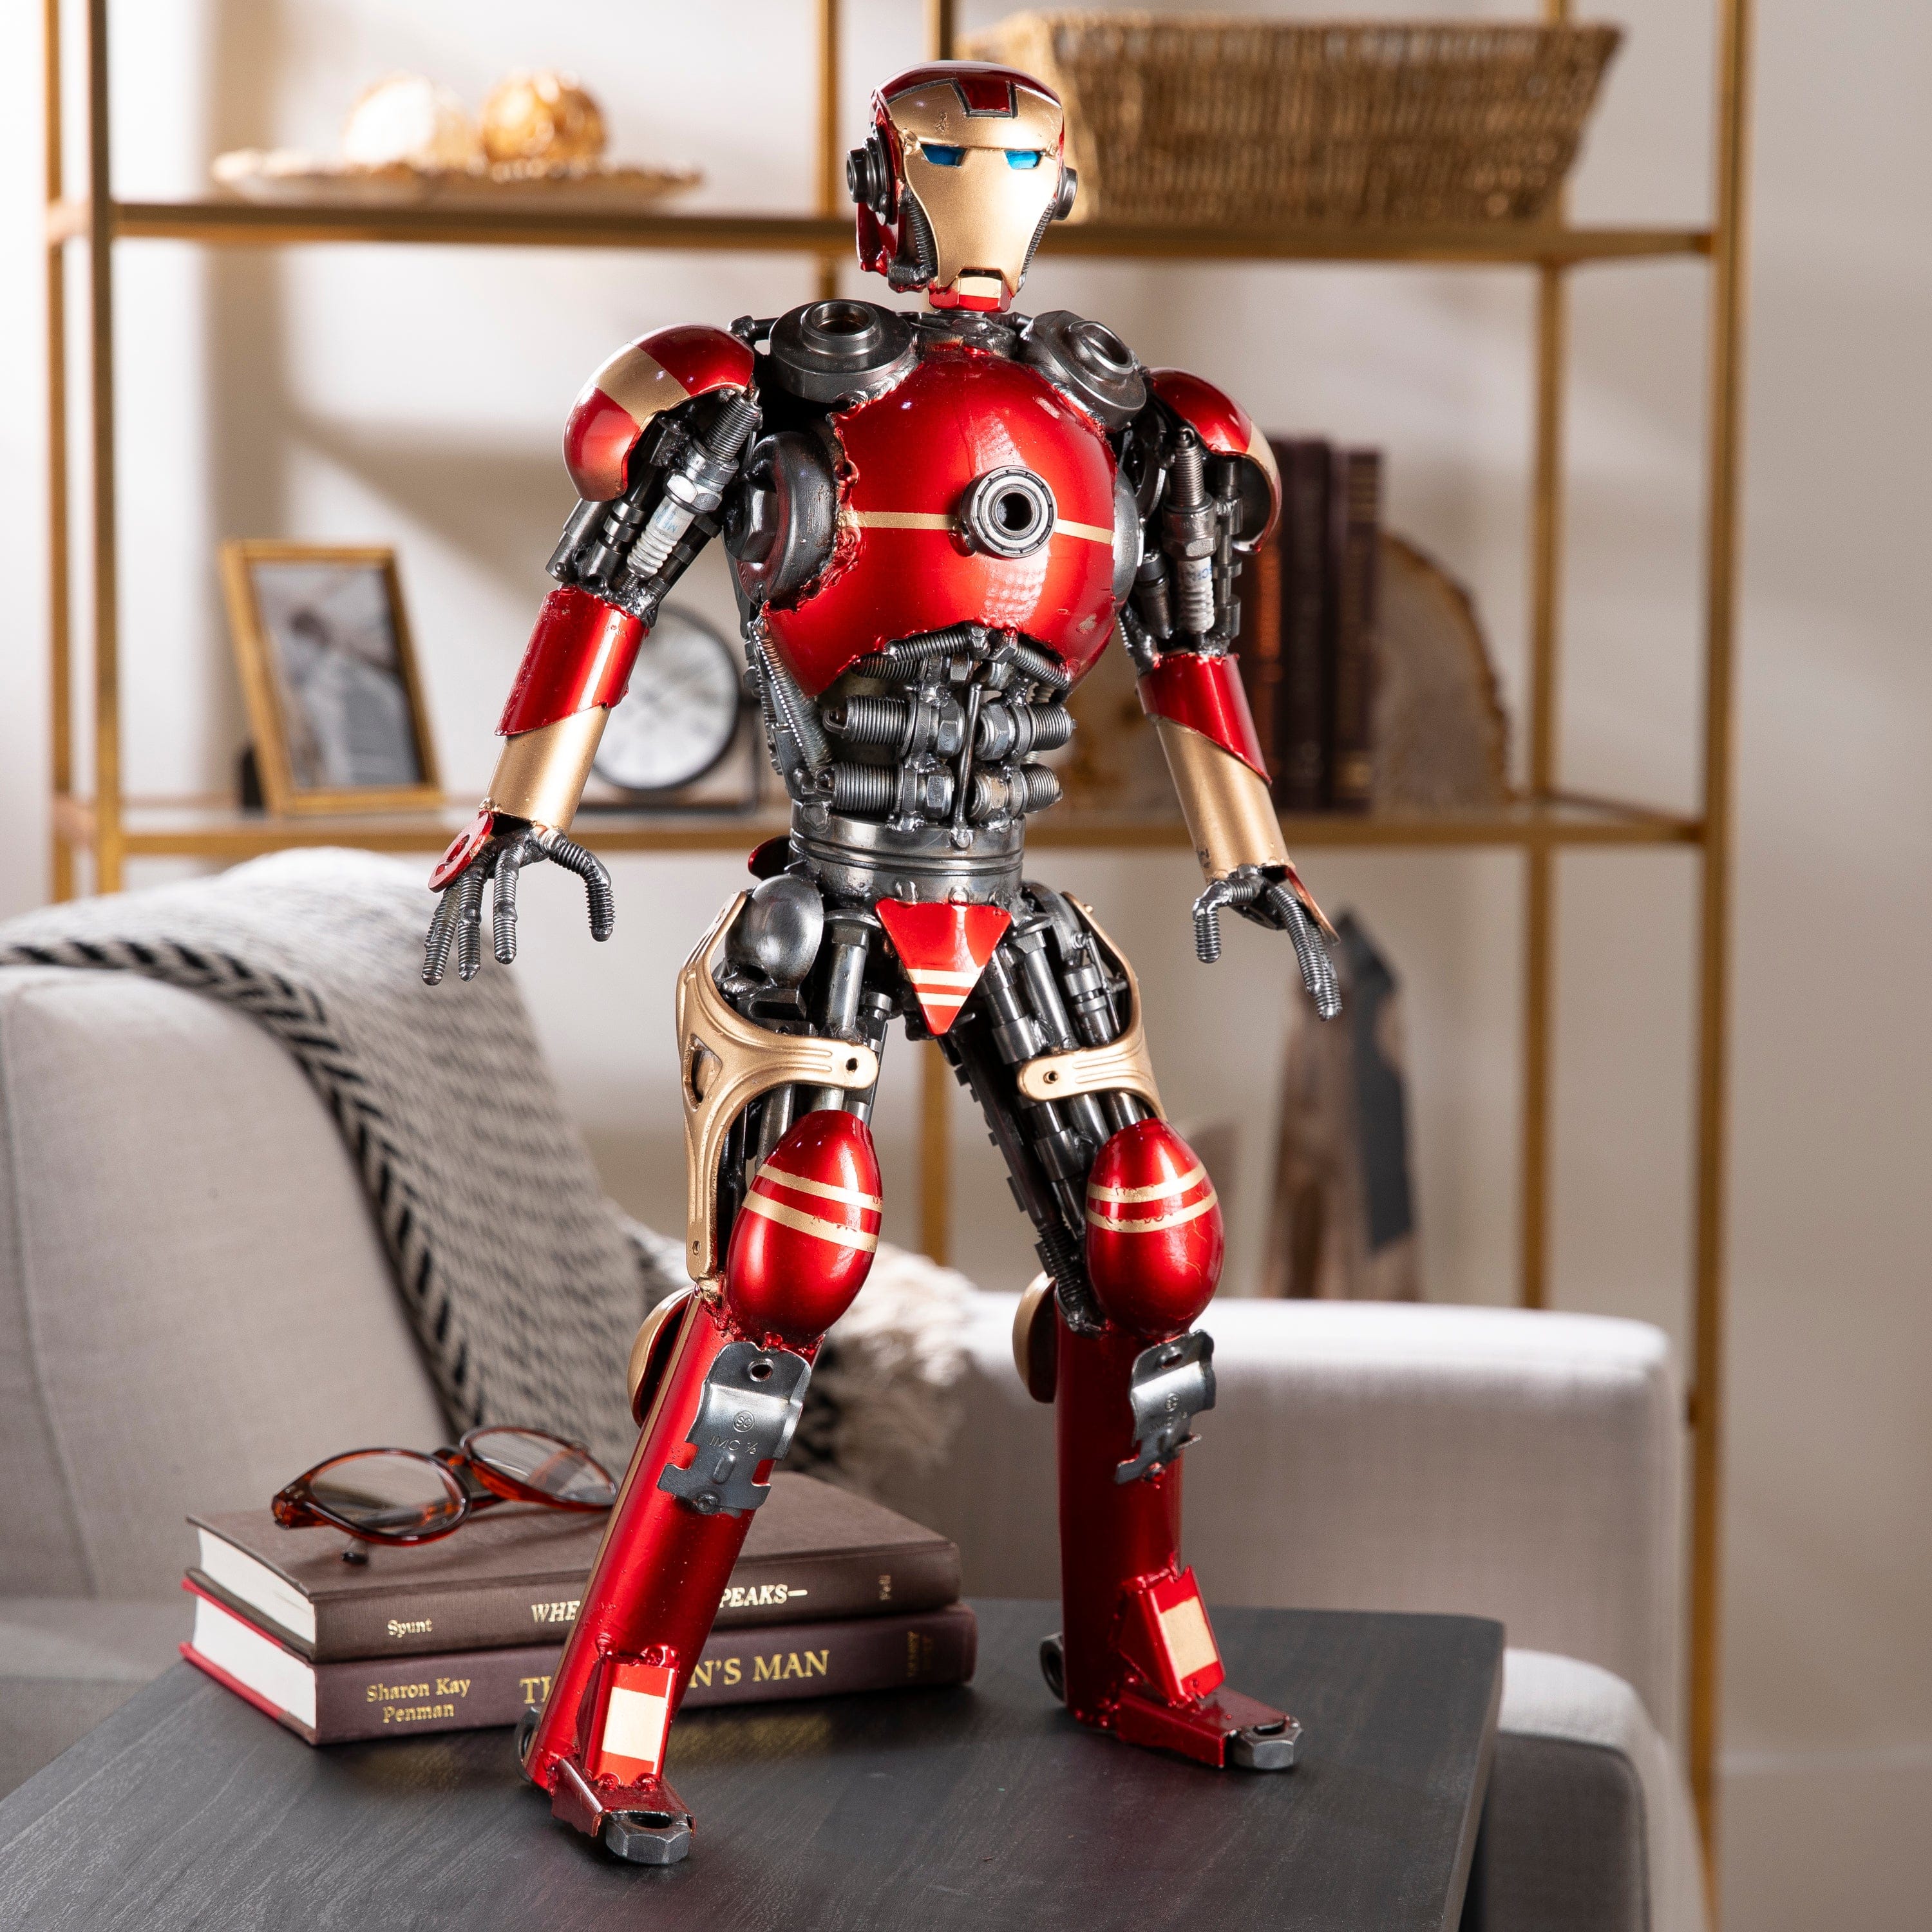 Kalifano Recycled Metal Art 20" Red Iron Man Inspired Recycled Metal Sculpture RMS-IMR50x34-S